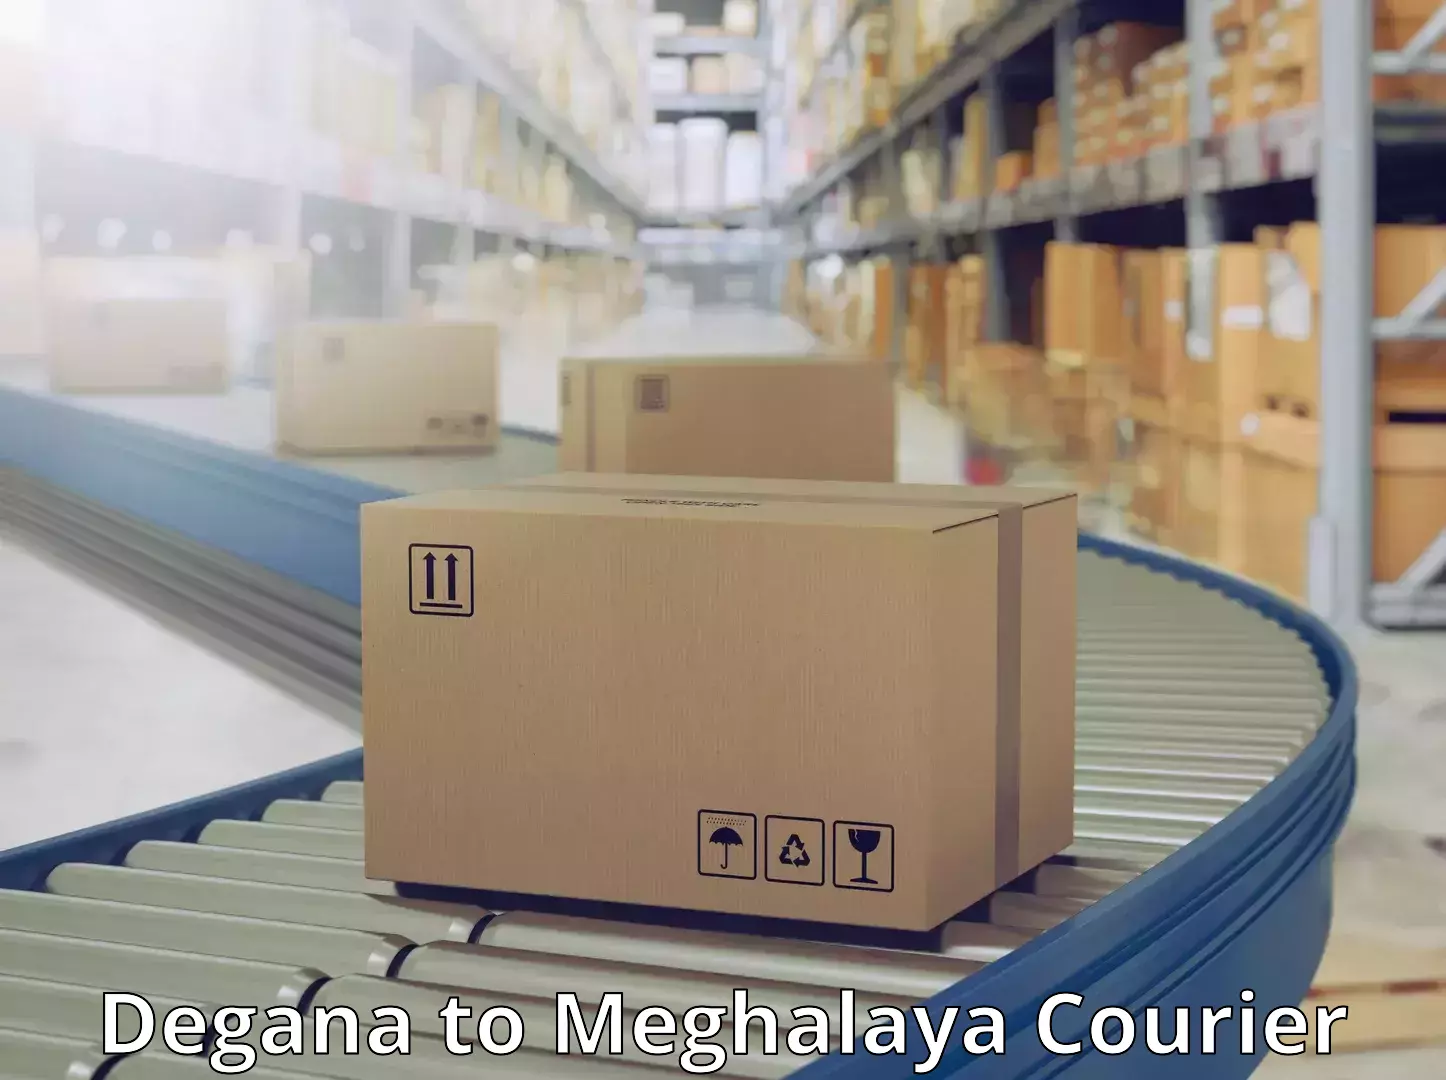 Supply chain delivery in Degana to Meghalaya